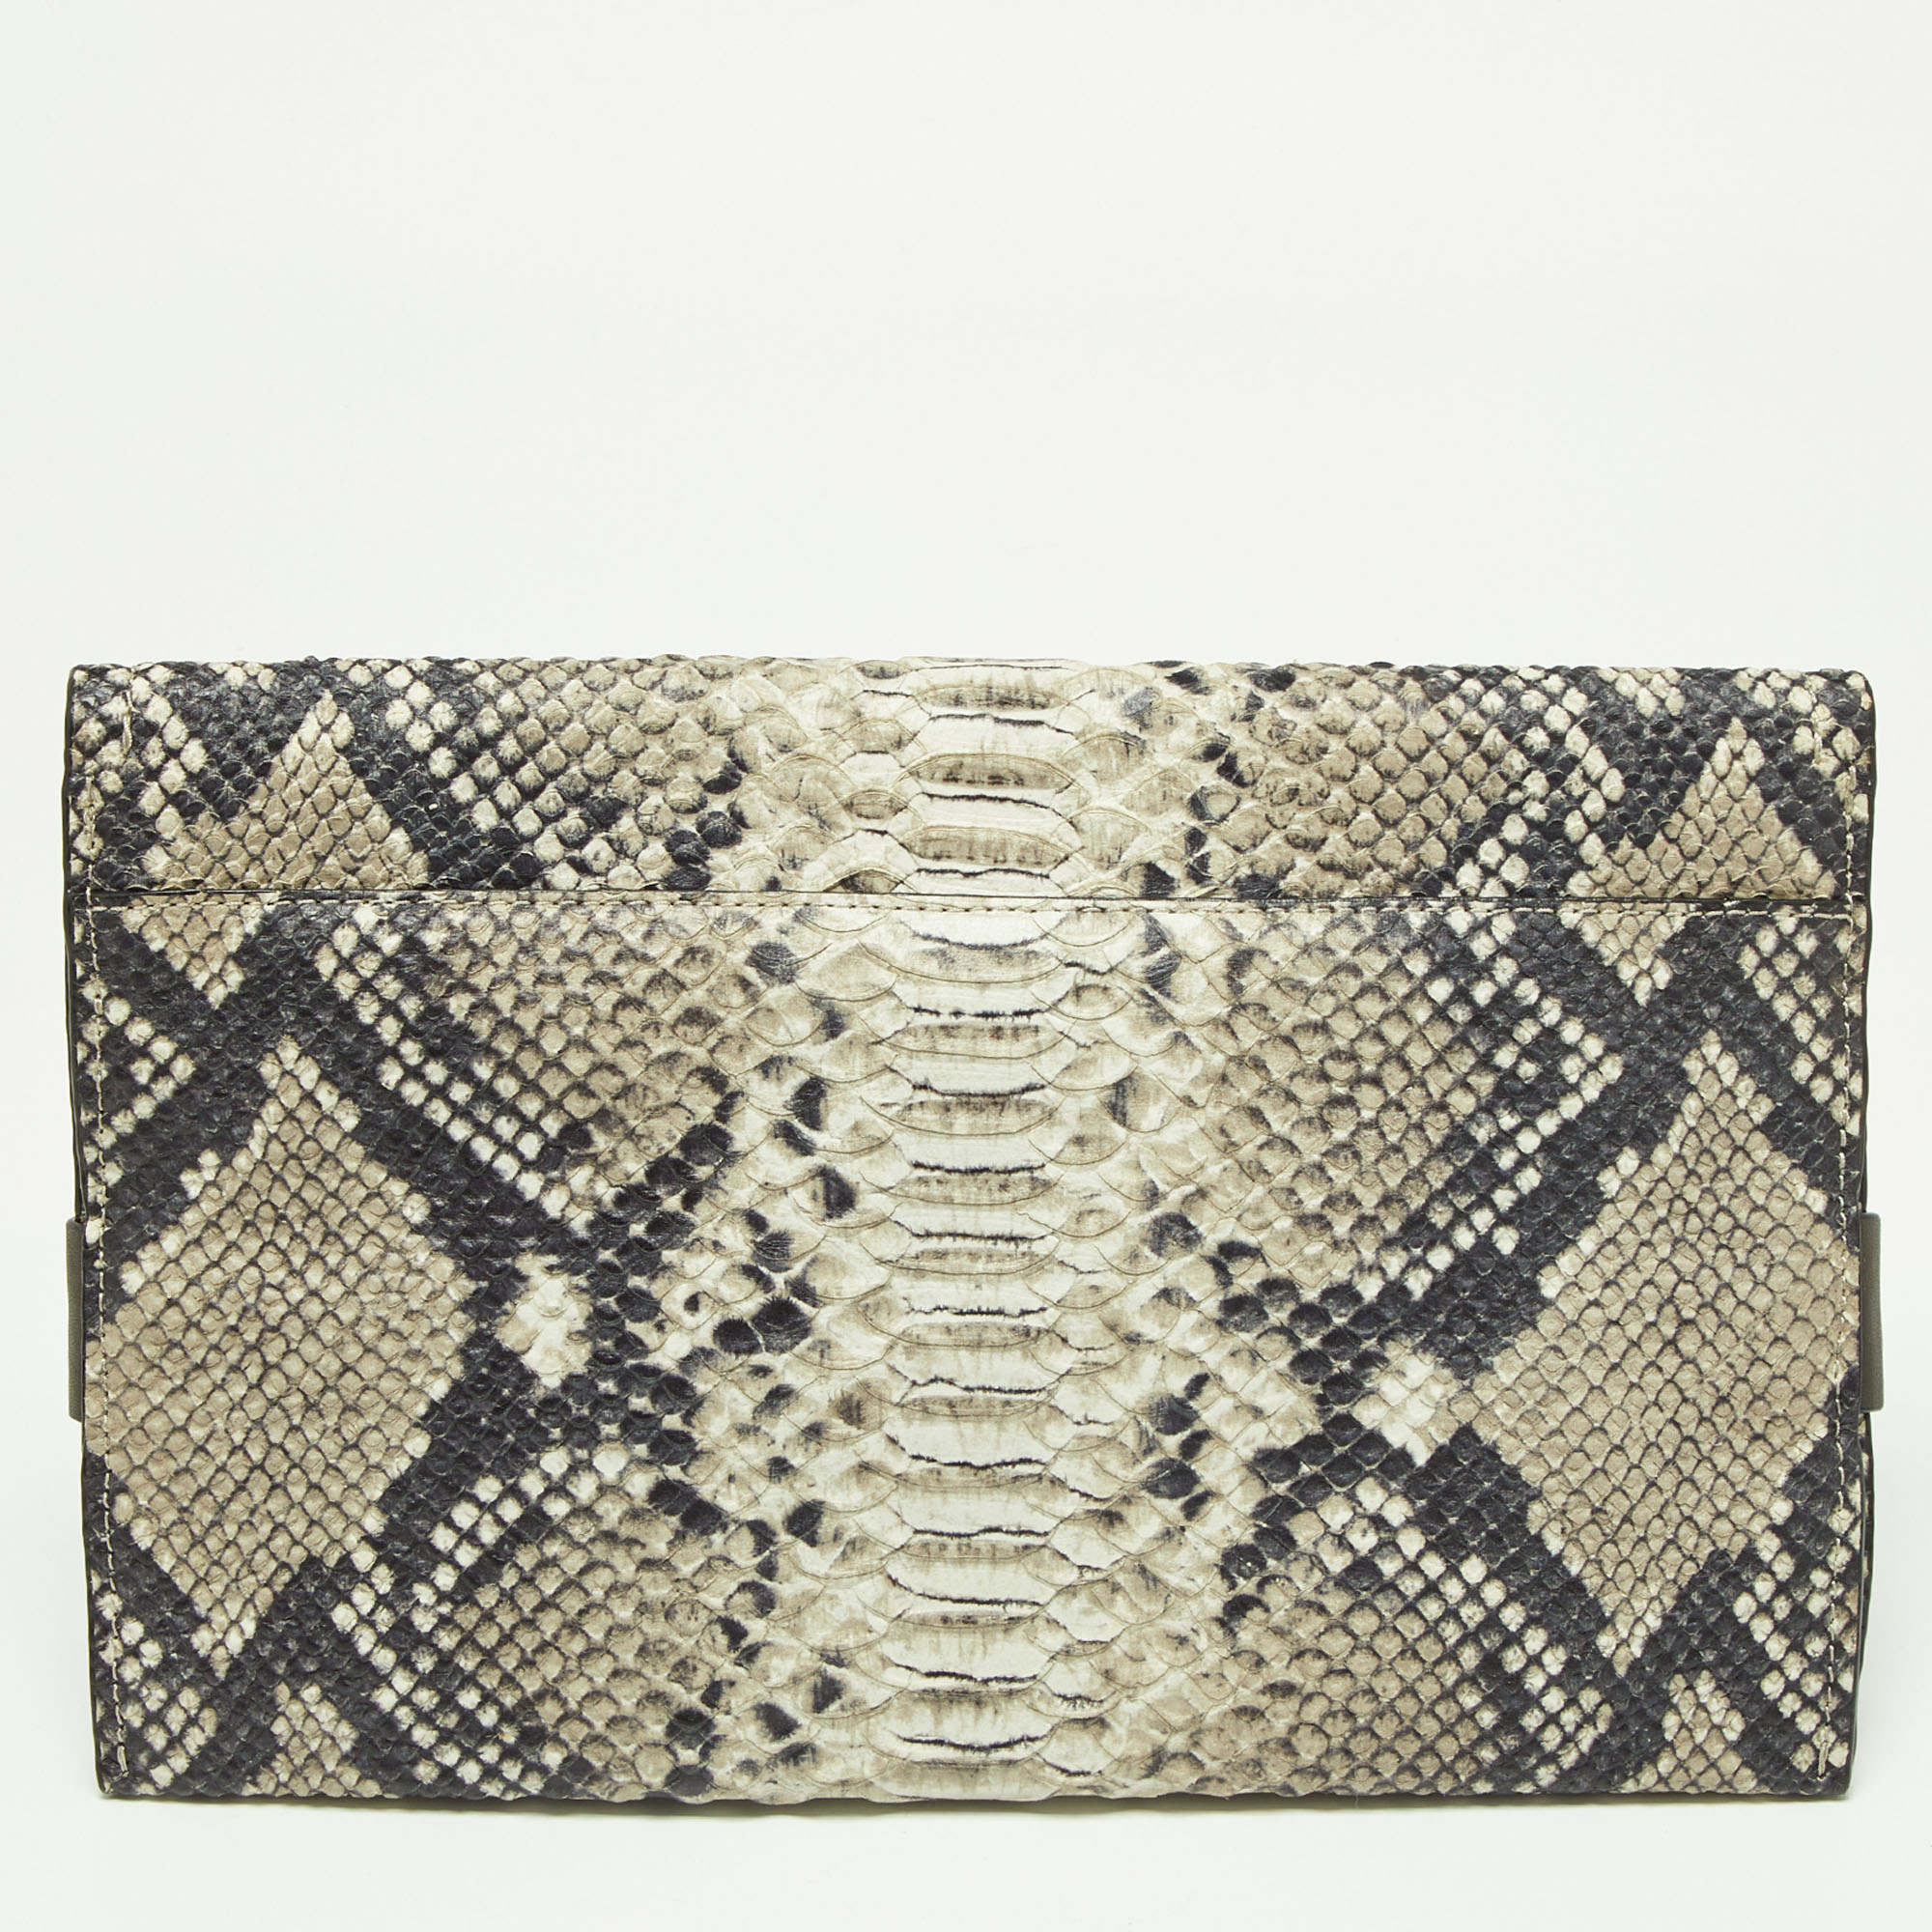 Coach Grey Python Embossed Leather Flap Clutch